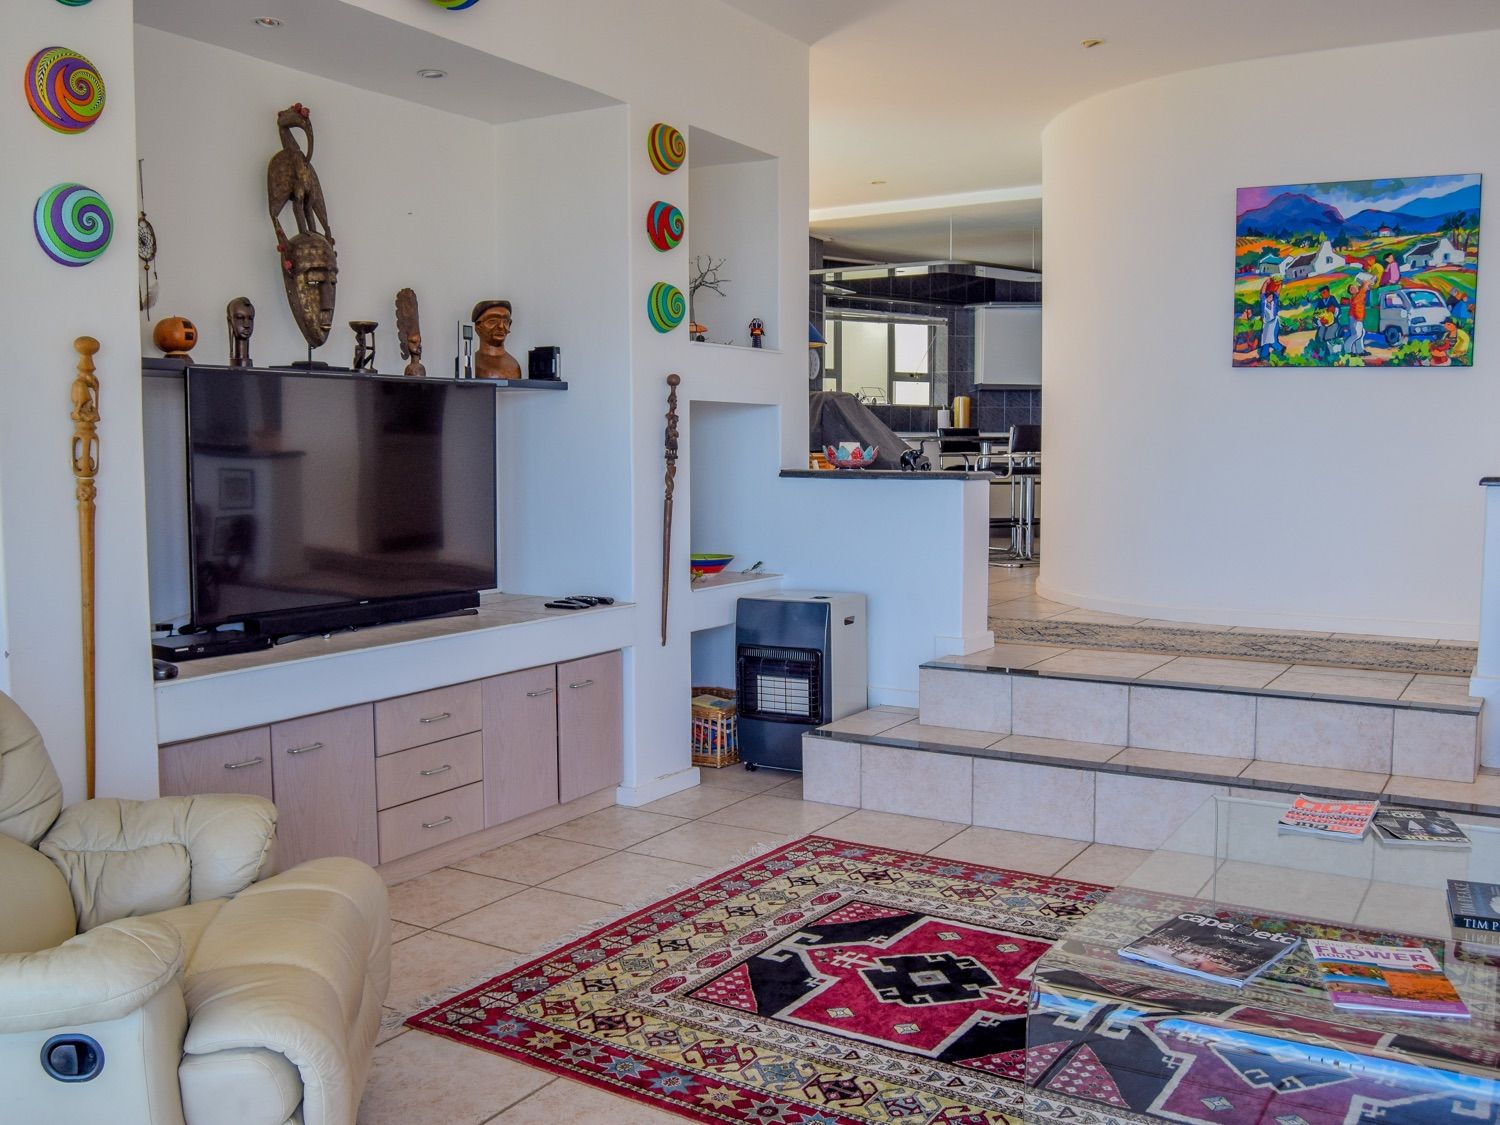 Photo 14 of Oceanscape Camps Bay accommodation in Camps Bay, Cape Town with 4 bedrooms and 4 bathrooms